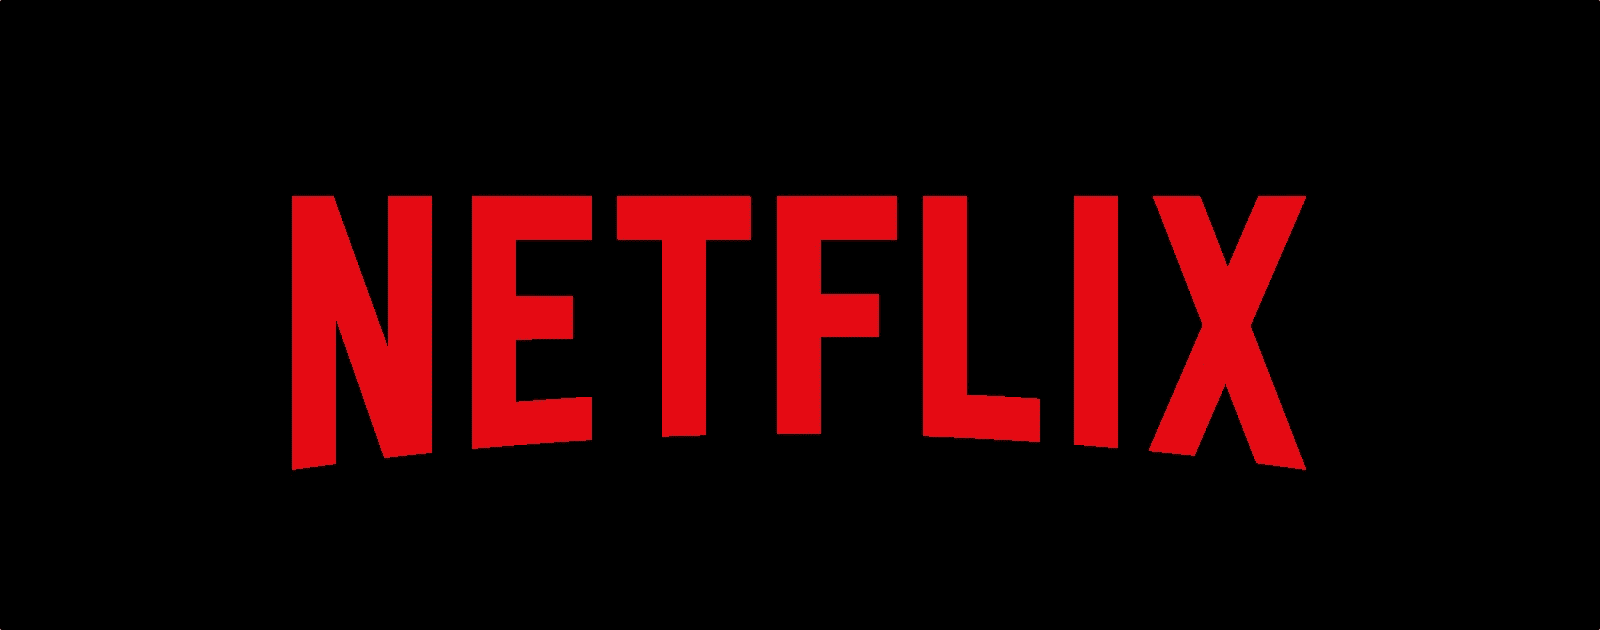 iOS: How to Download Netflix Shows for Offline Binging